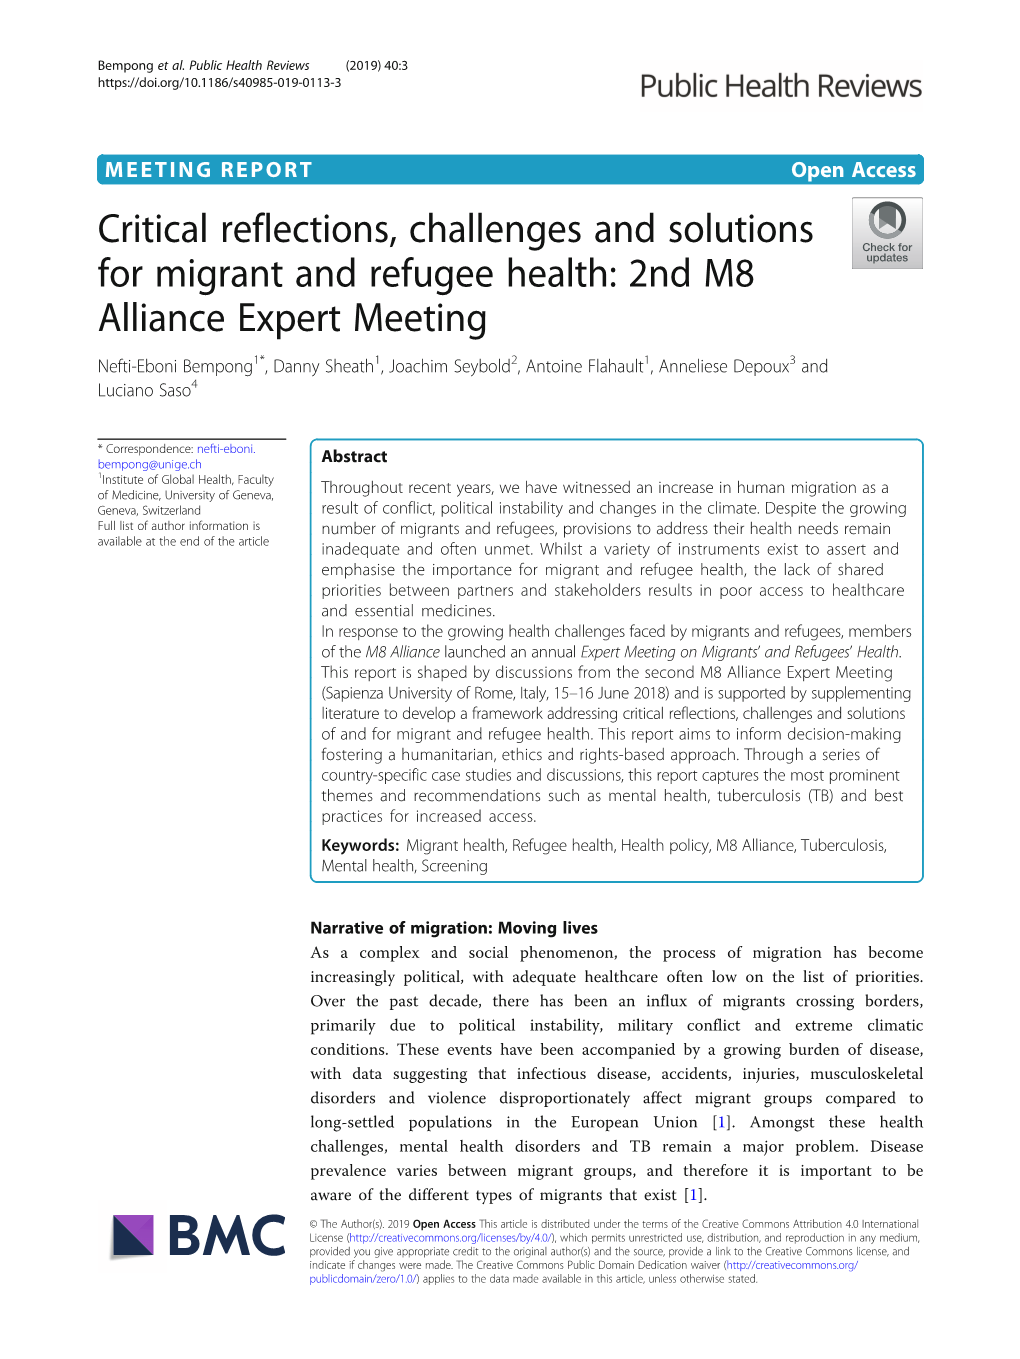 Critical Reflections, Challenges and Solutions